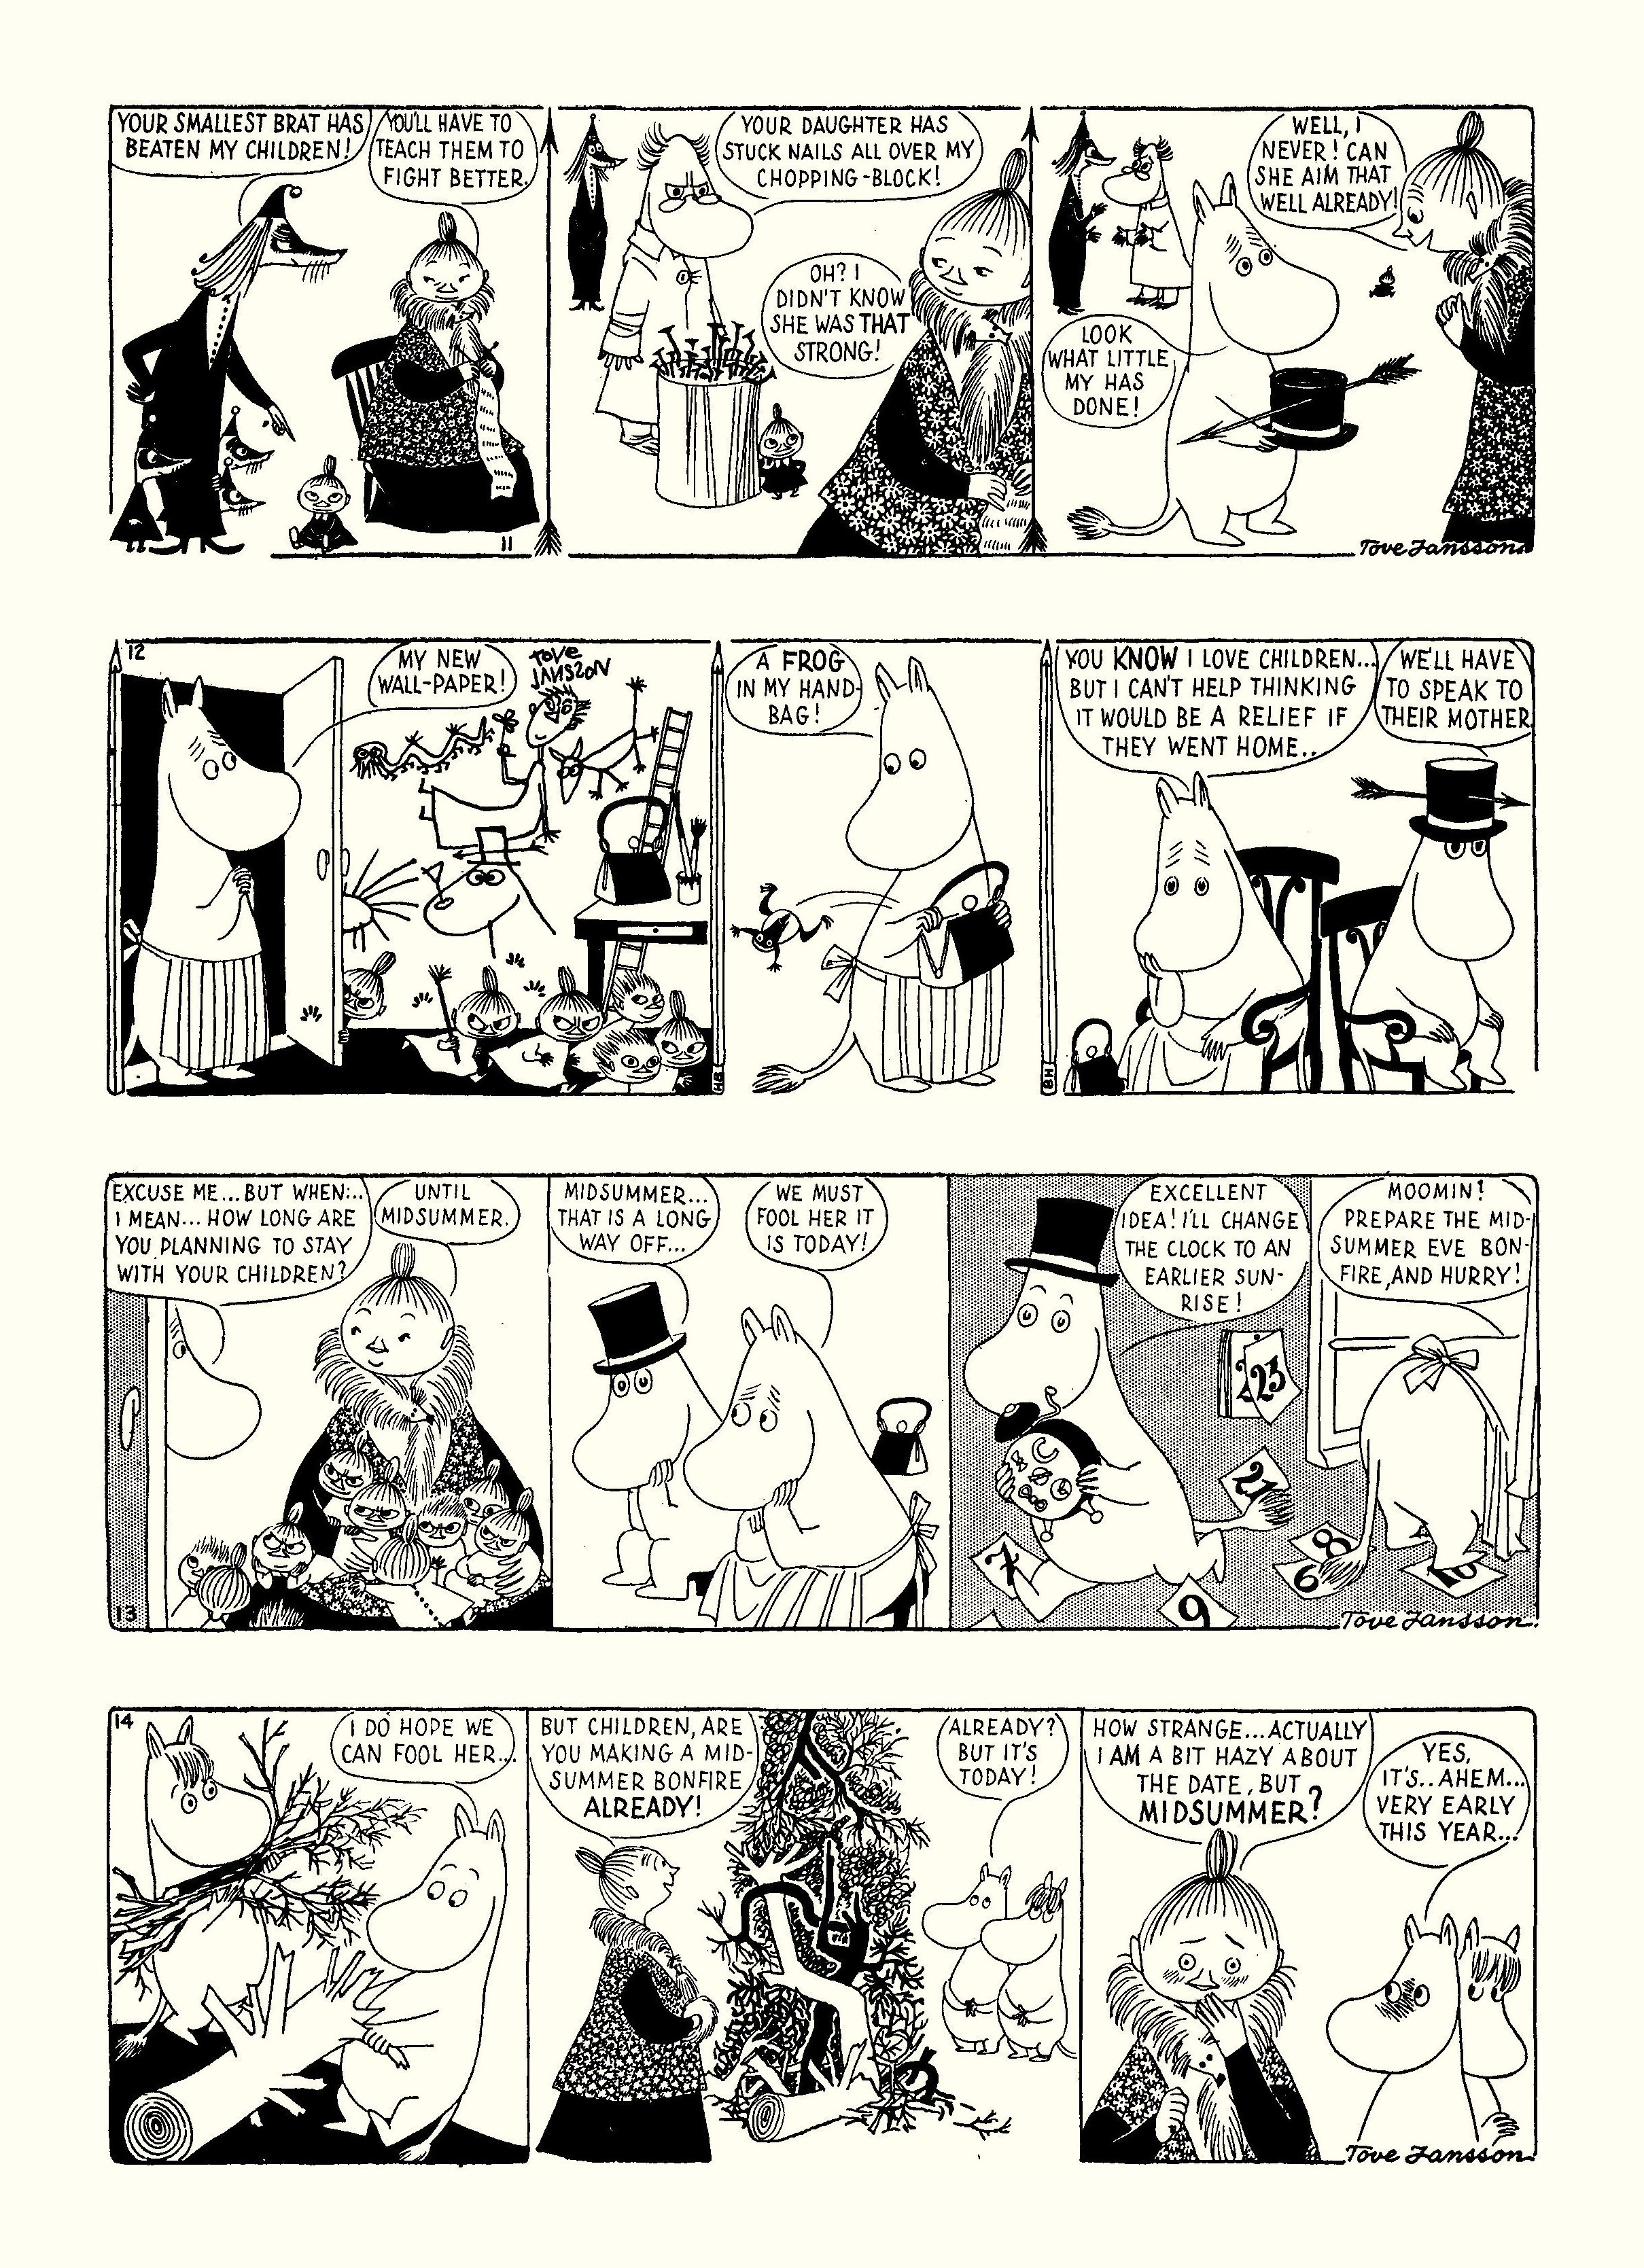 Read online Moomin: The Complete Tove Jansson Comic Strip comic -  Issue # TPB 2 - 51